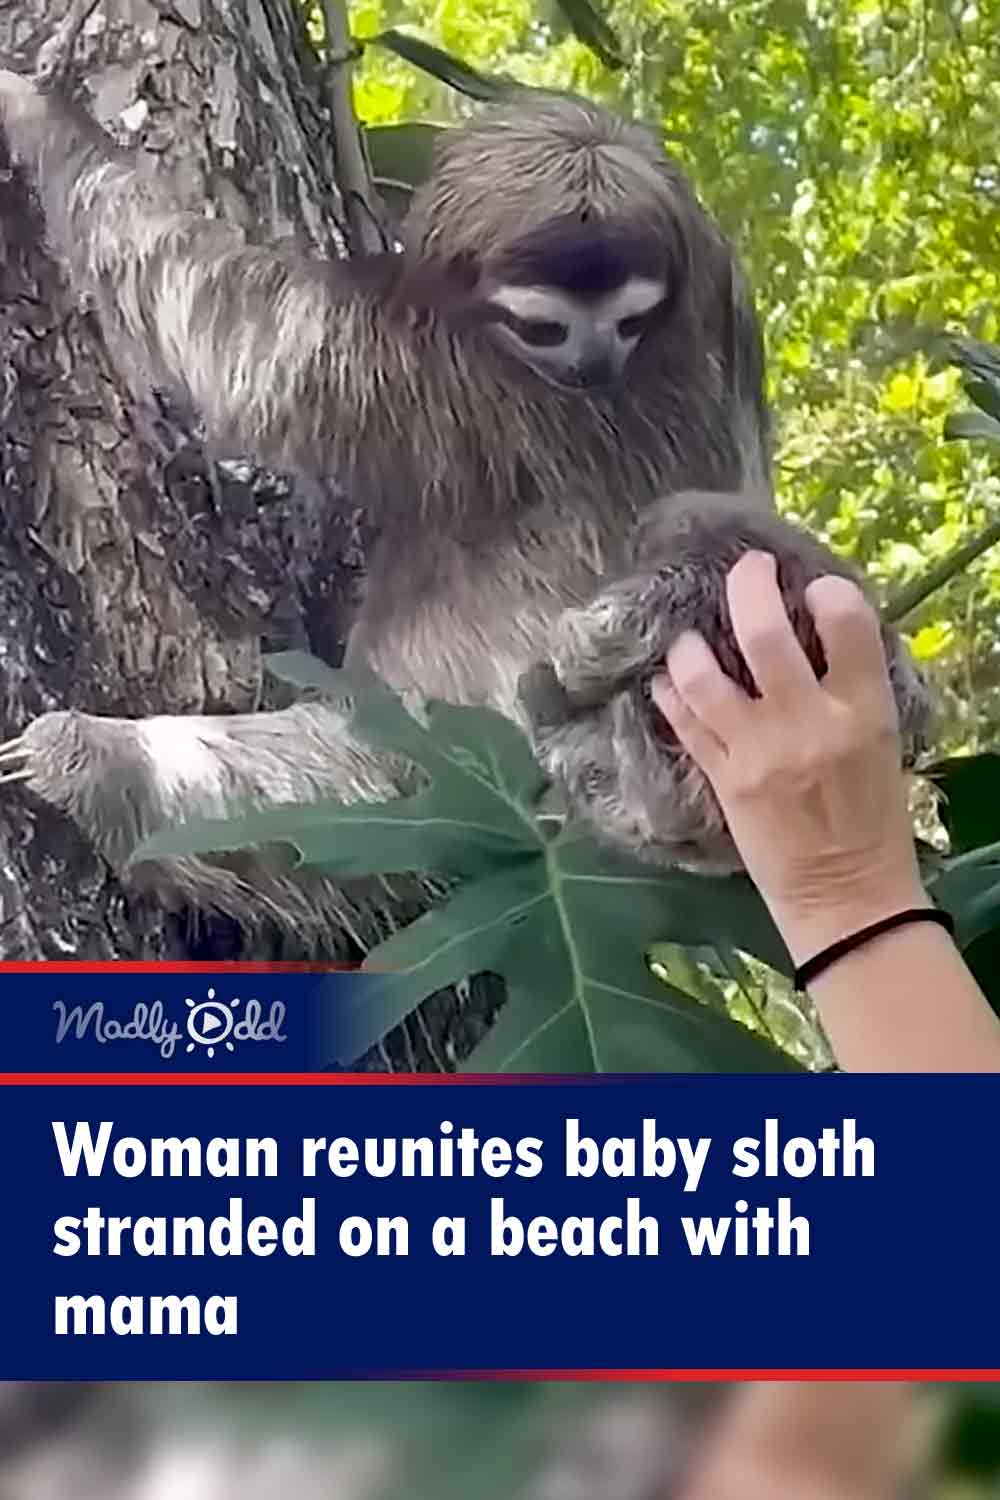 Woman reunites baby sloth stranded on a beach with mama